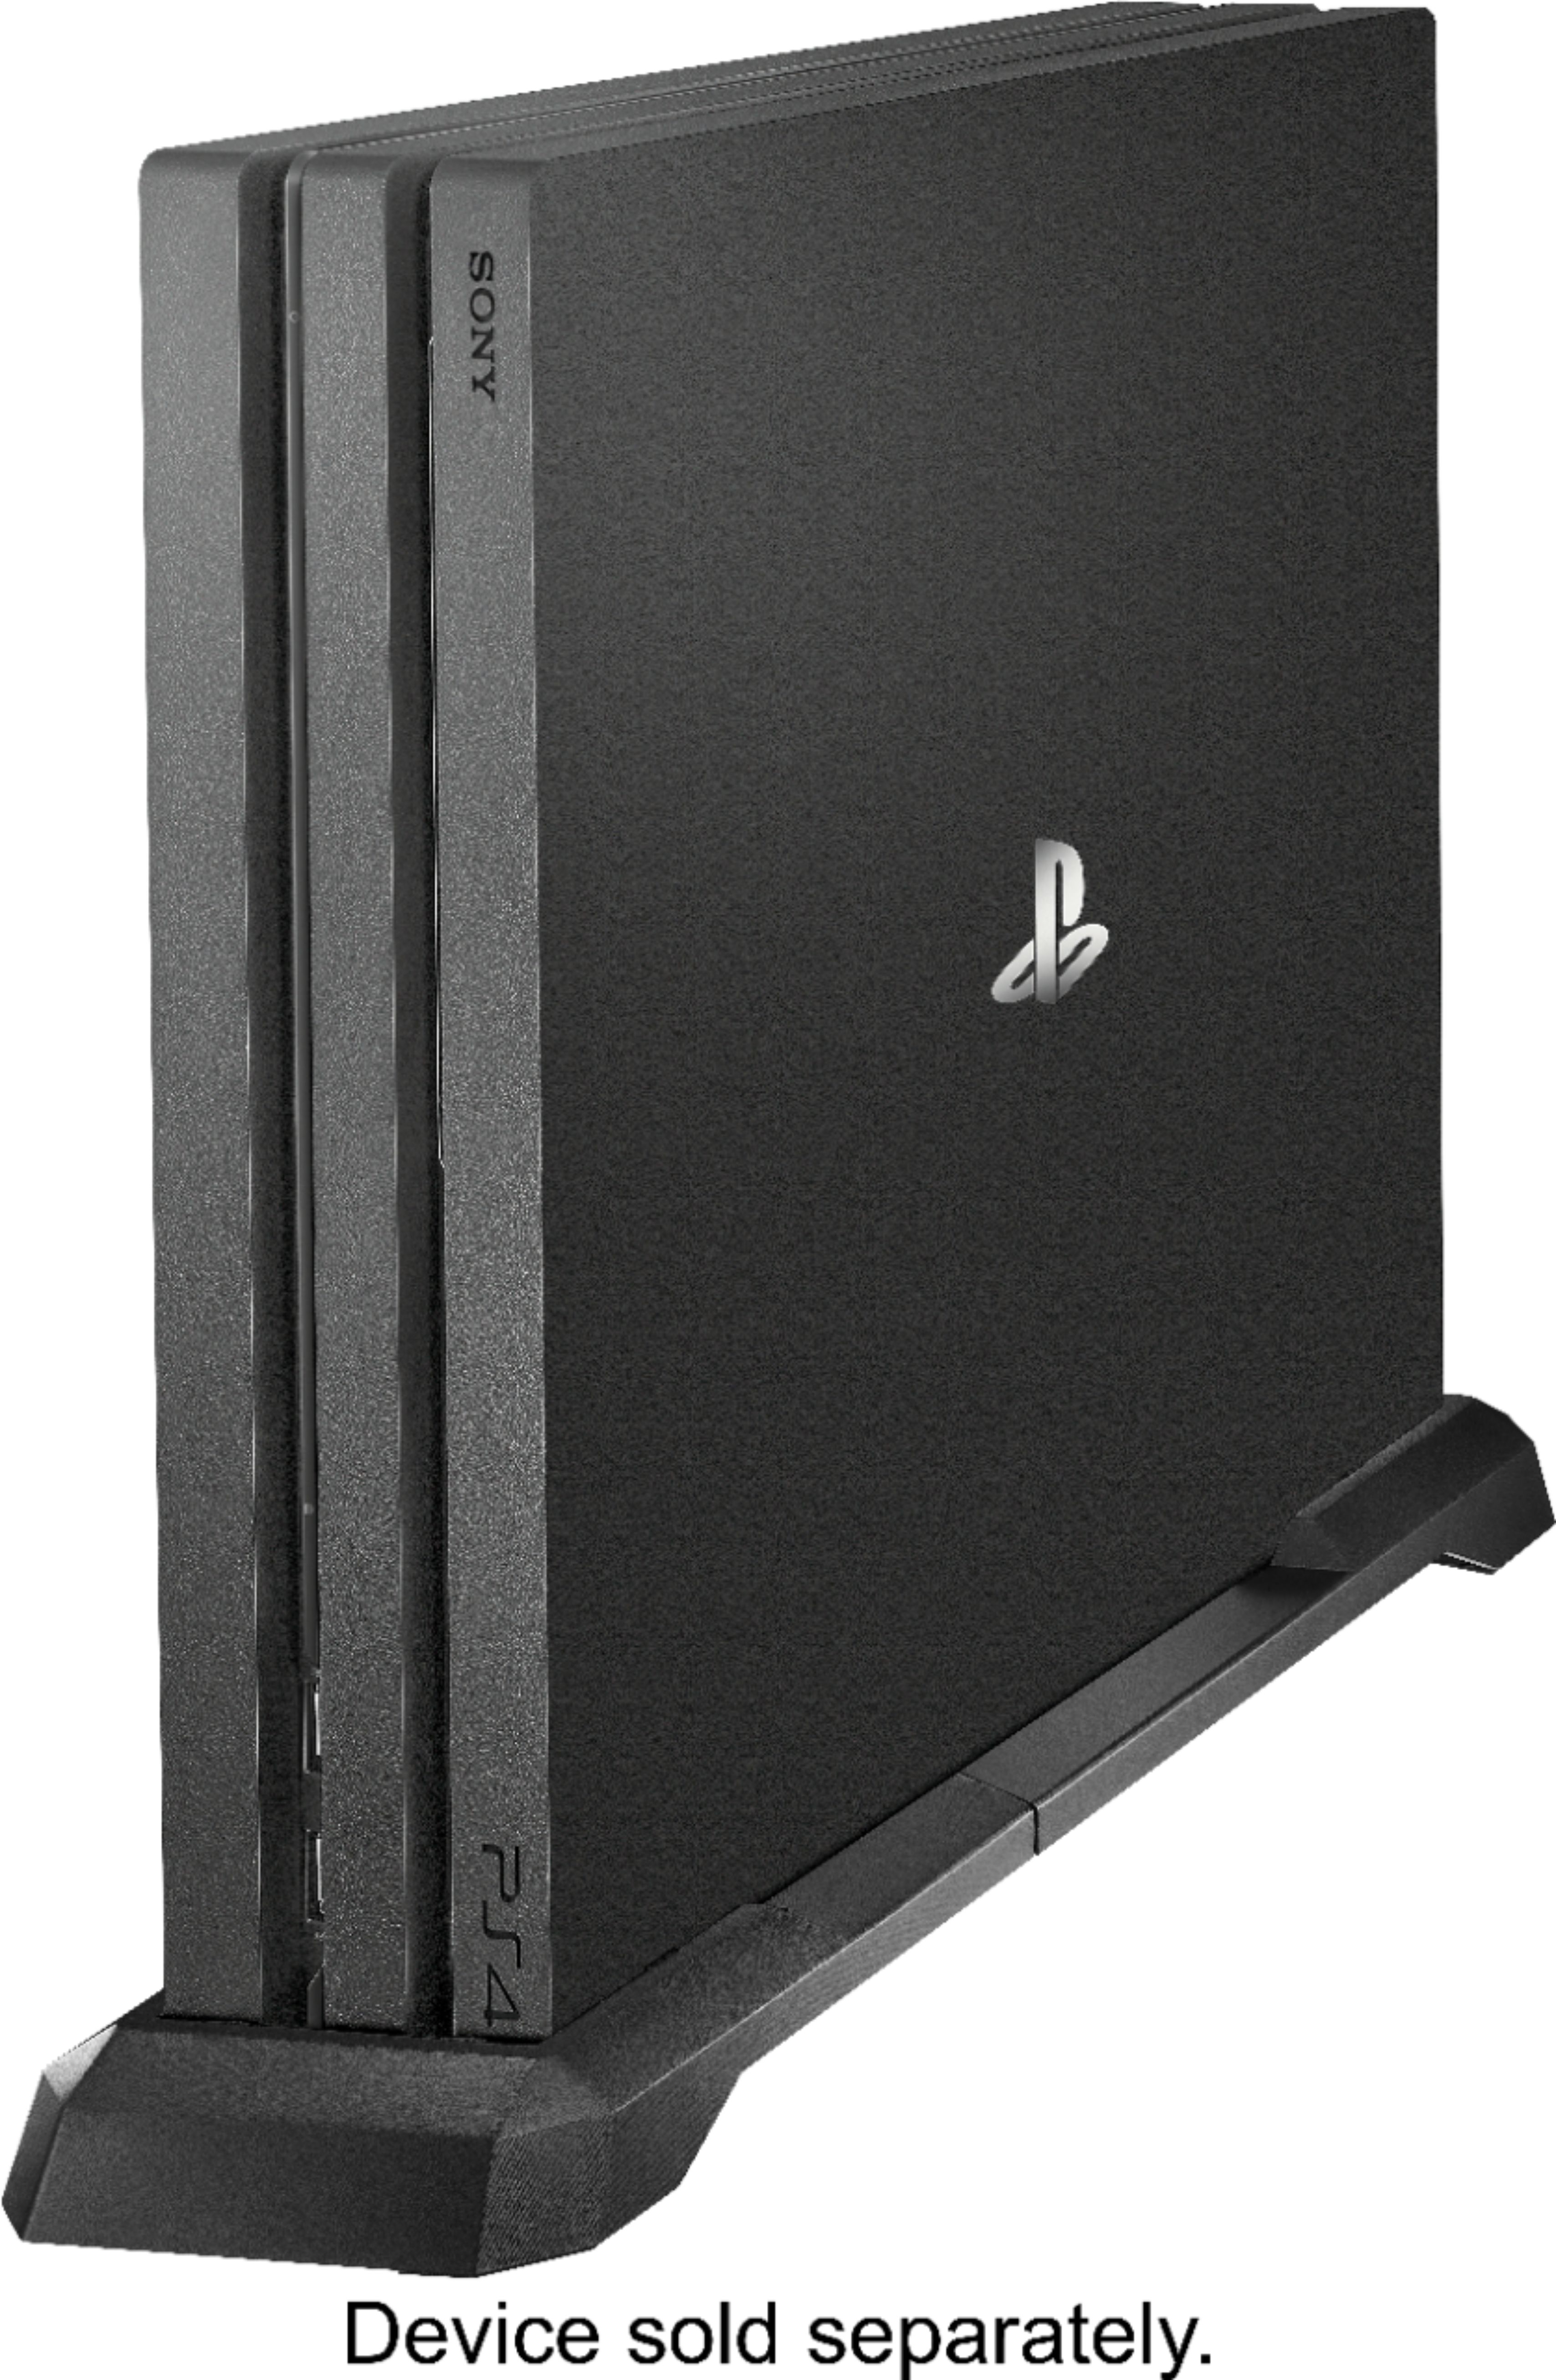 ps4 pro vertical stand sony